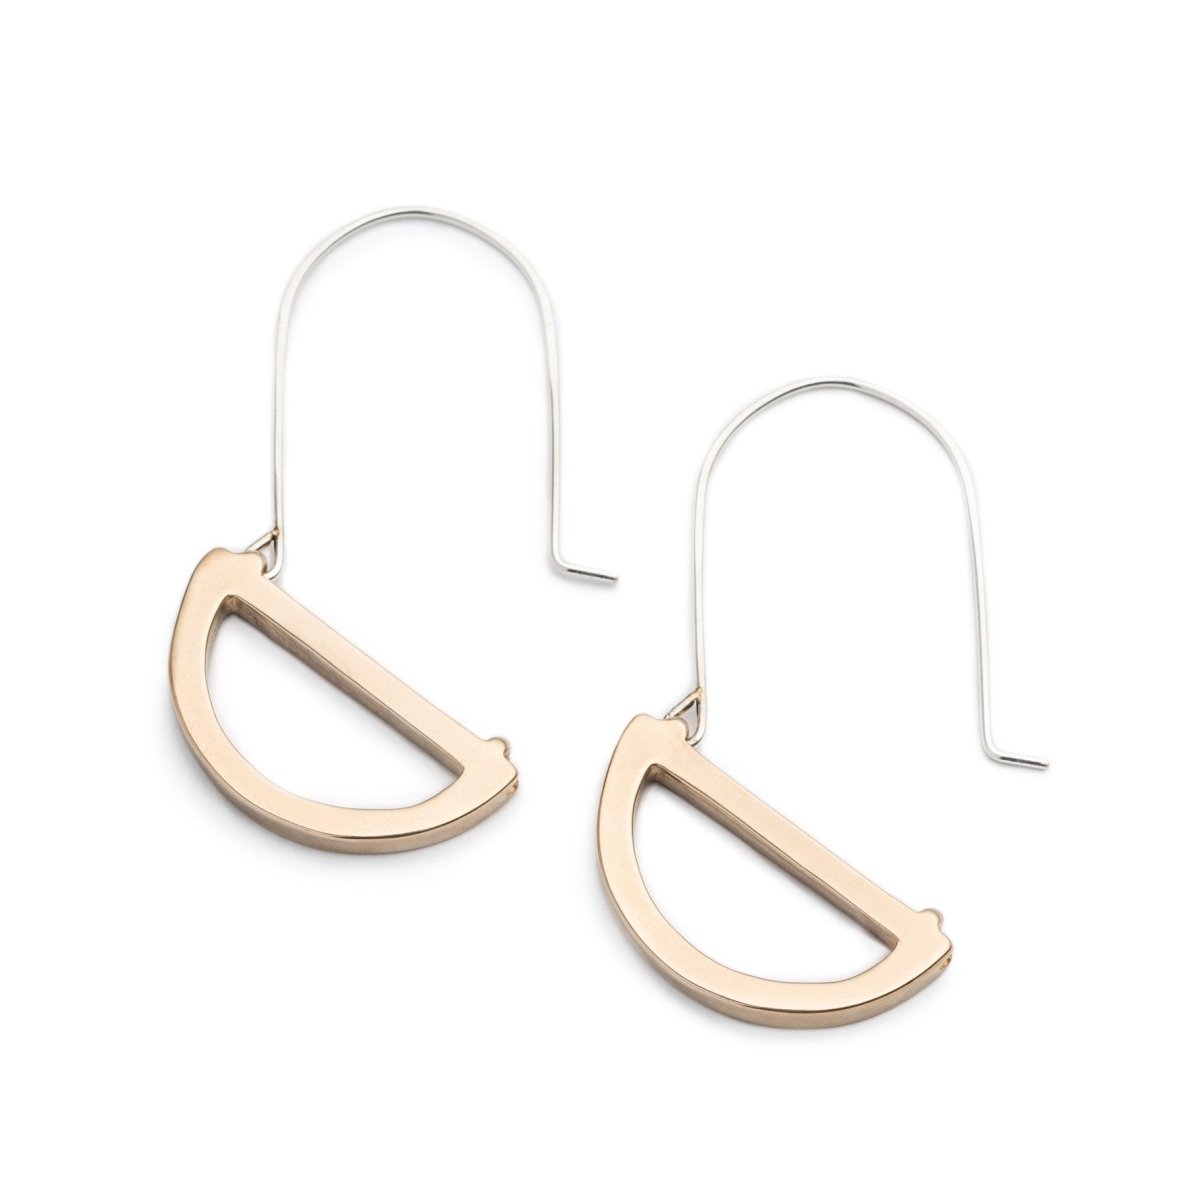 Modern, polished, cast bronze semicircle pendants hanging below long, hand-formed, sterling silver hoops. Hand-crafted in Portland, Oregon.